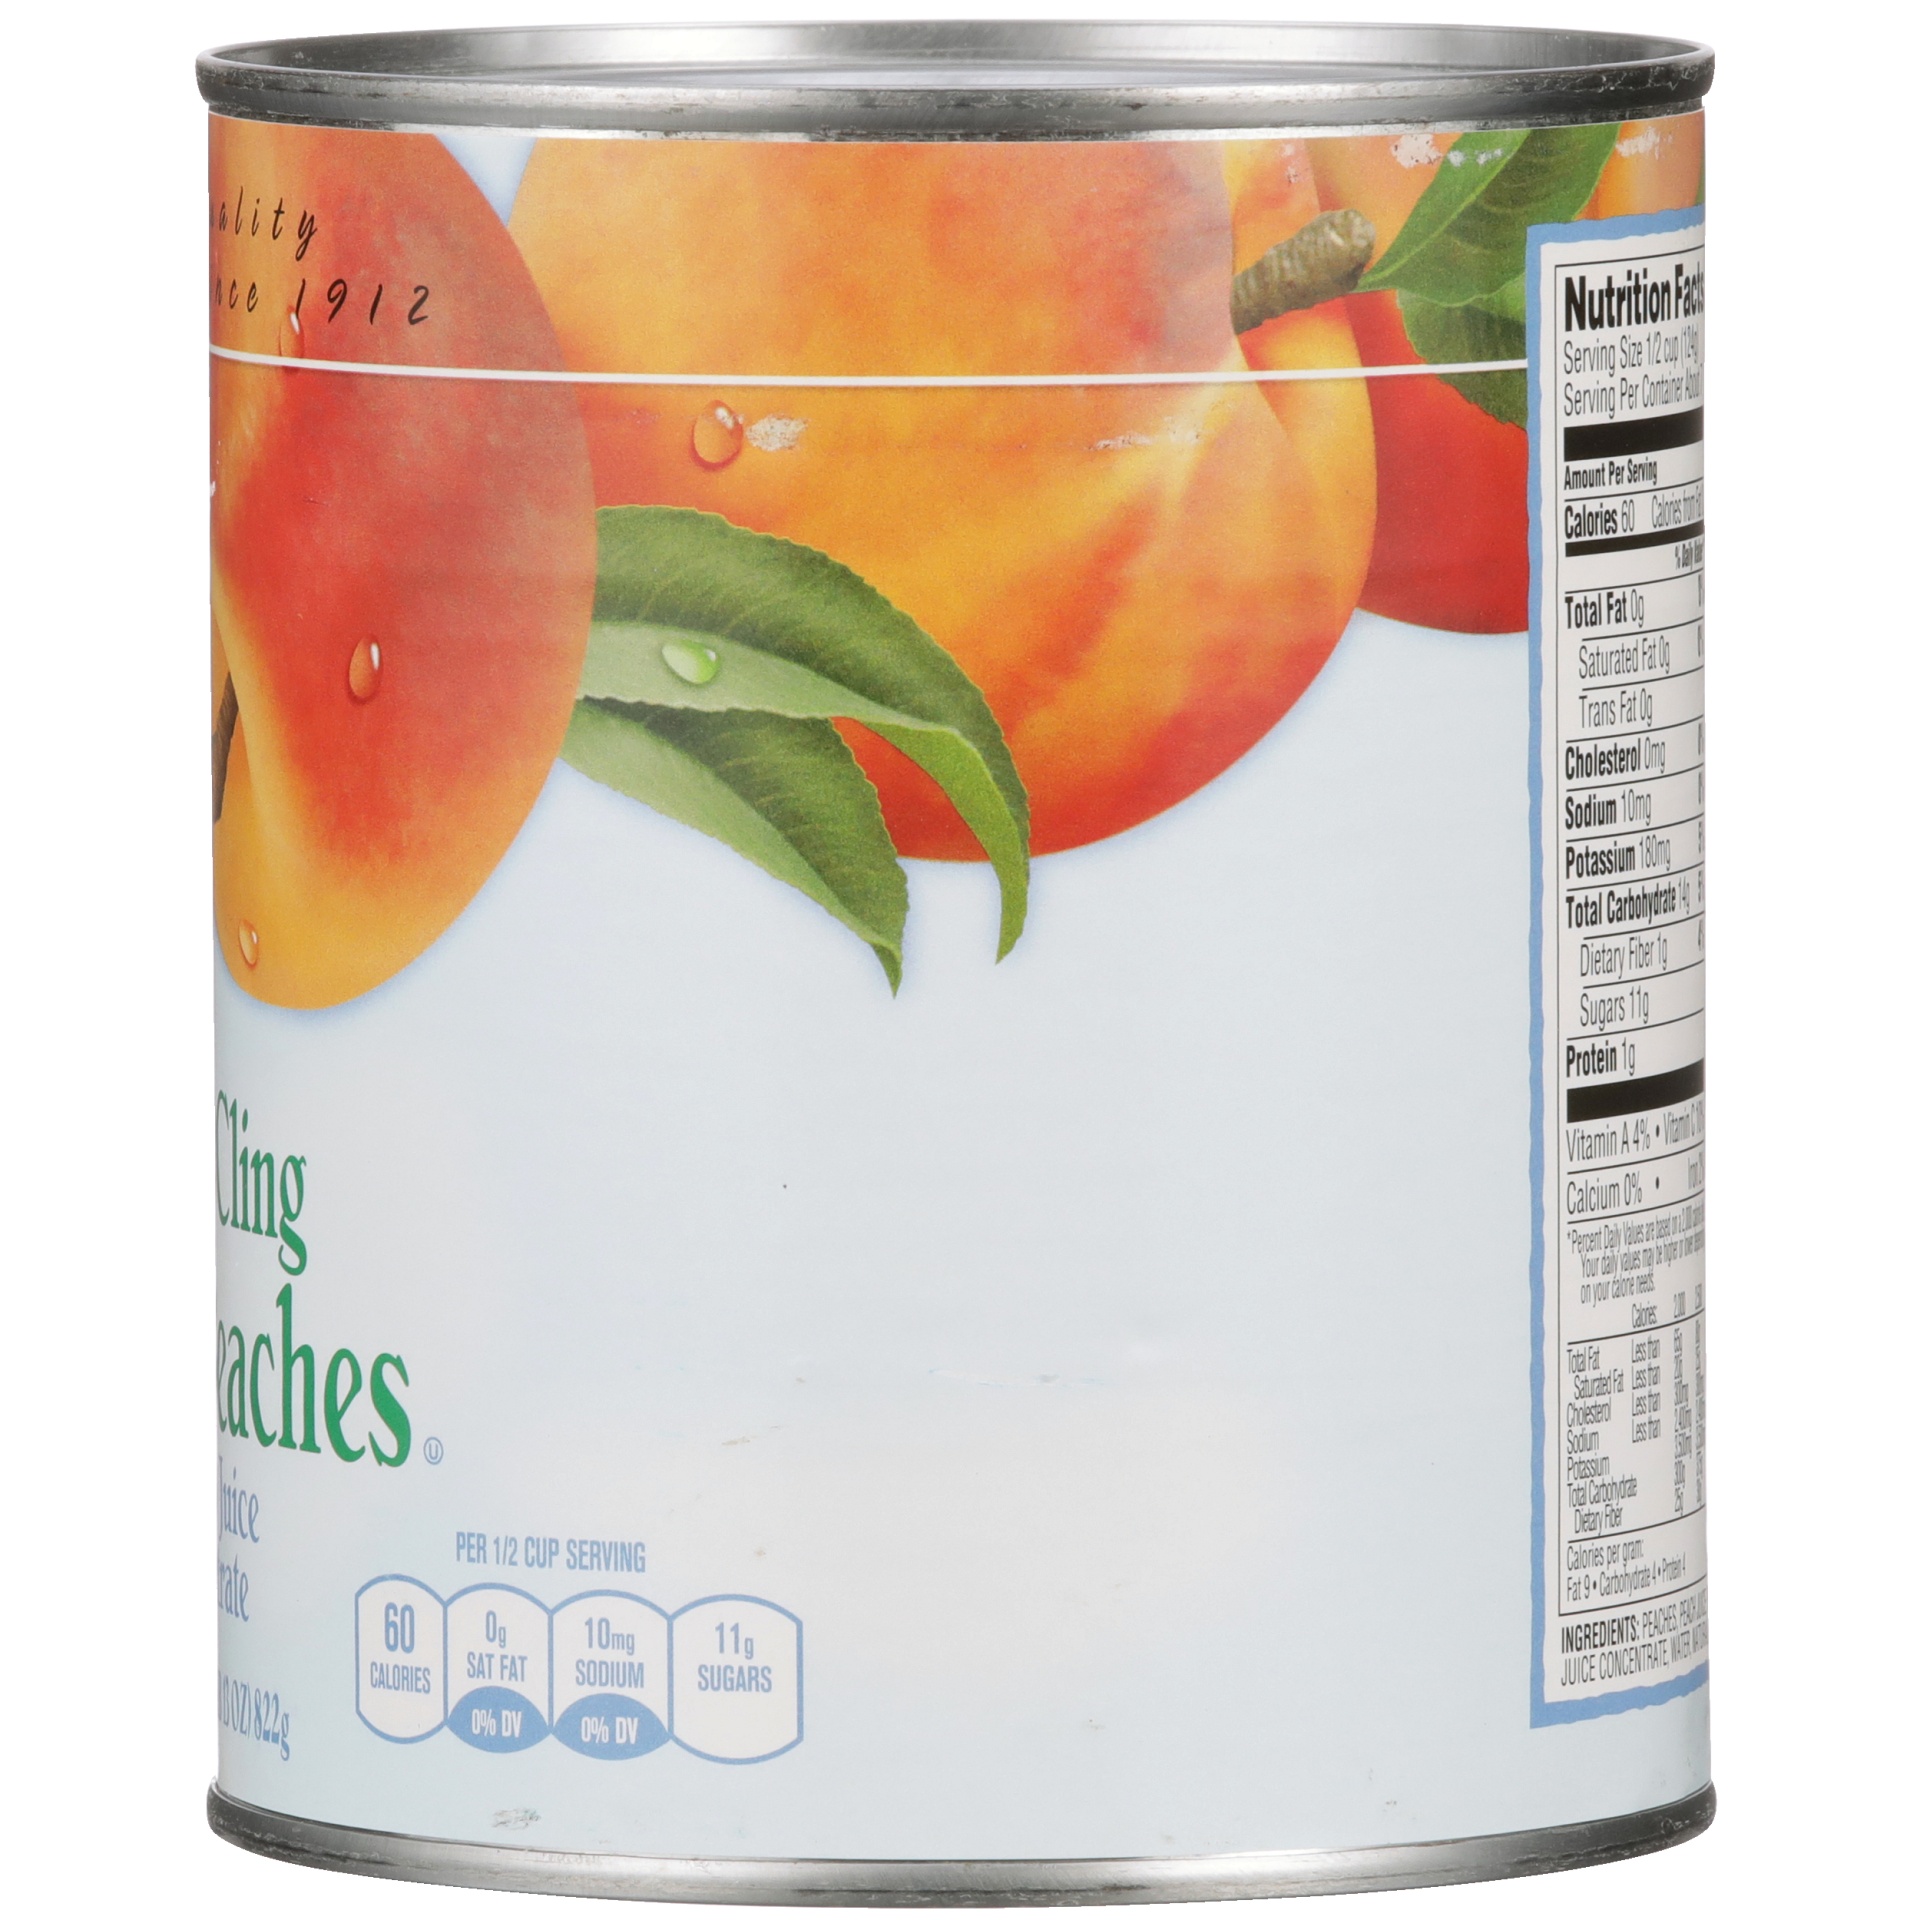 slide 2 of 6, Weis Quality Yellow Cling Sliced Peaches in 100% Juice Canned Fruit, 29 oz